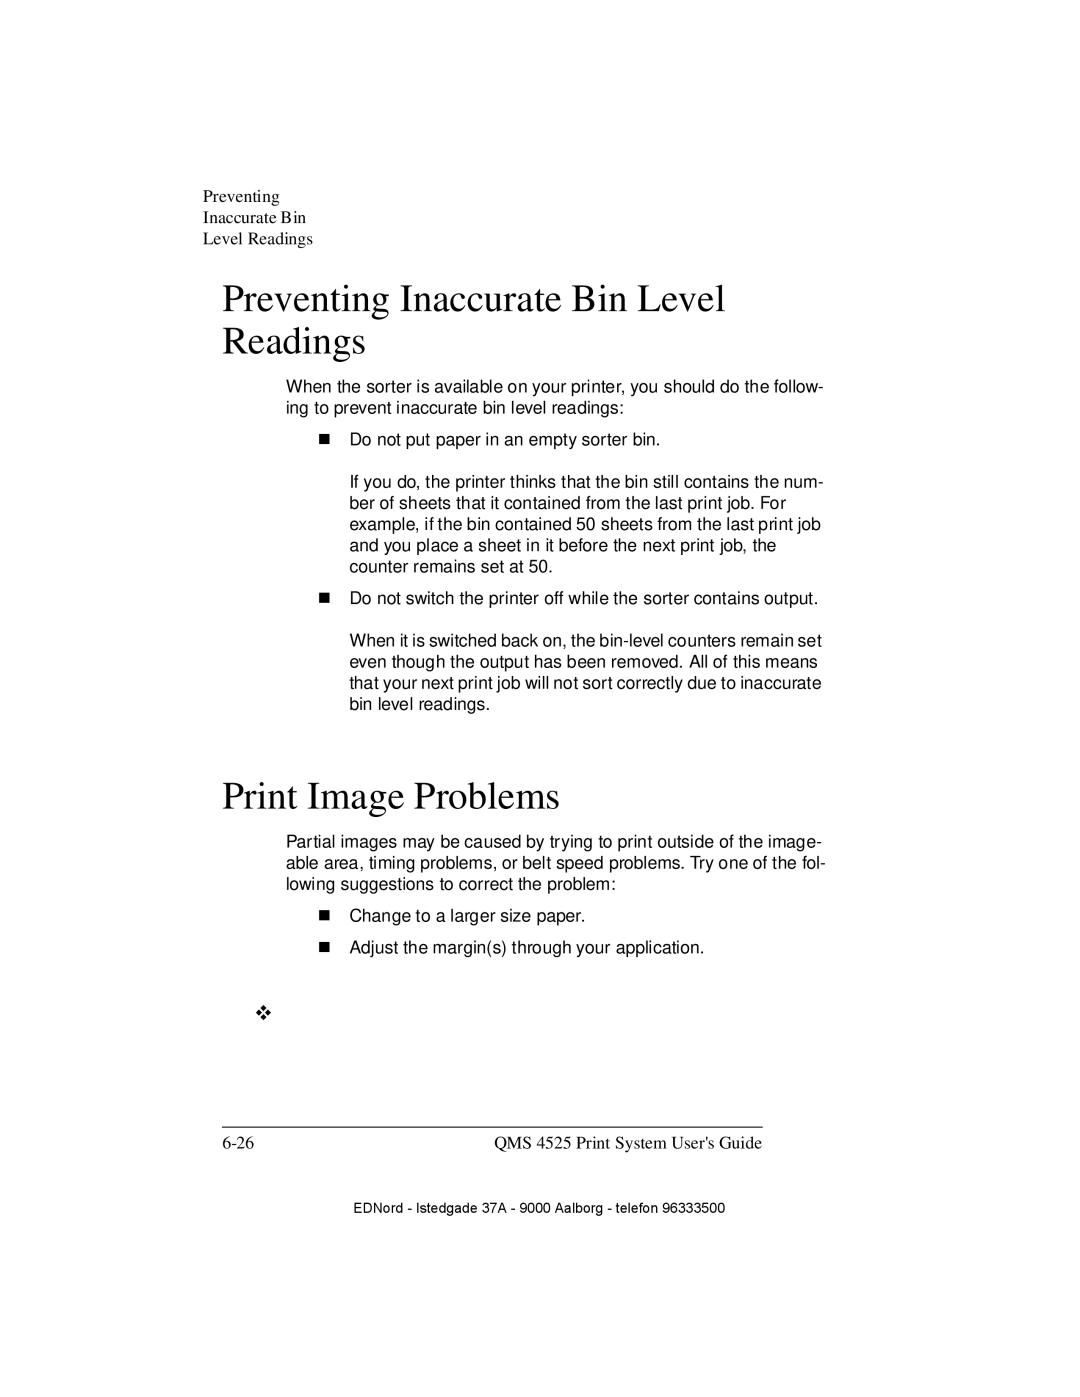 IBM QMS 4525 manual Preventing Inaccurate Bin Level Readings, Print Image Problems 